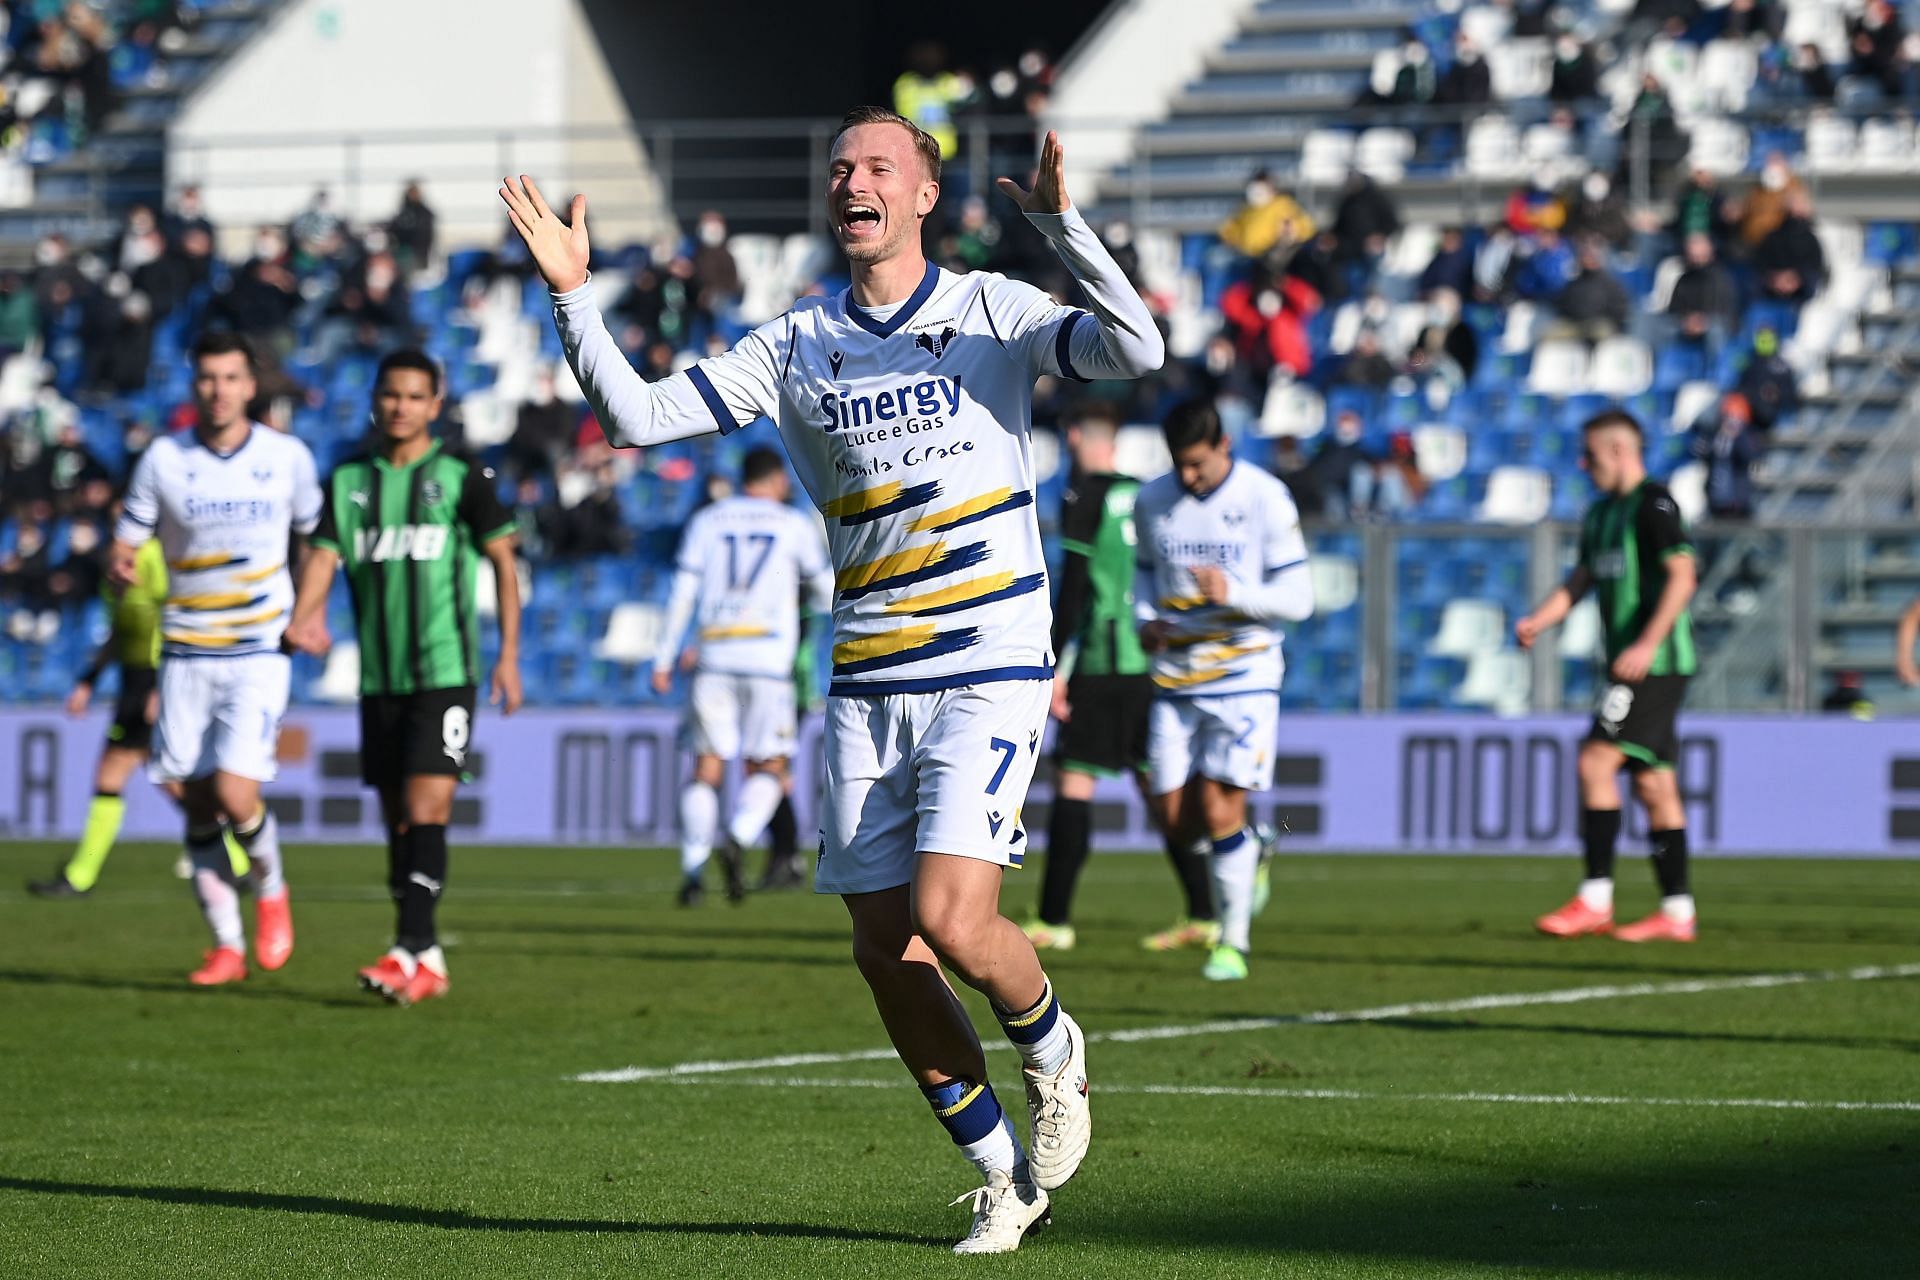 Verona and Bologna square off in their Serie A fixture on Friday